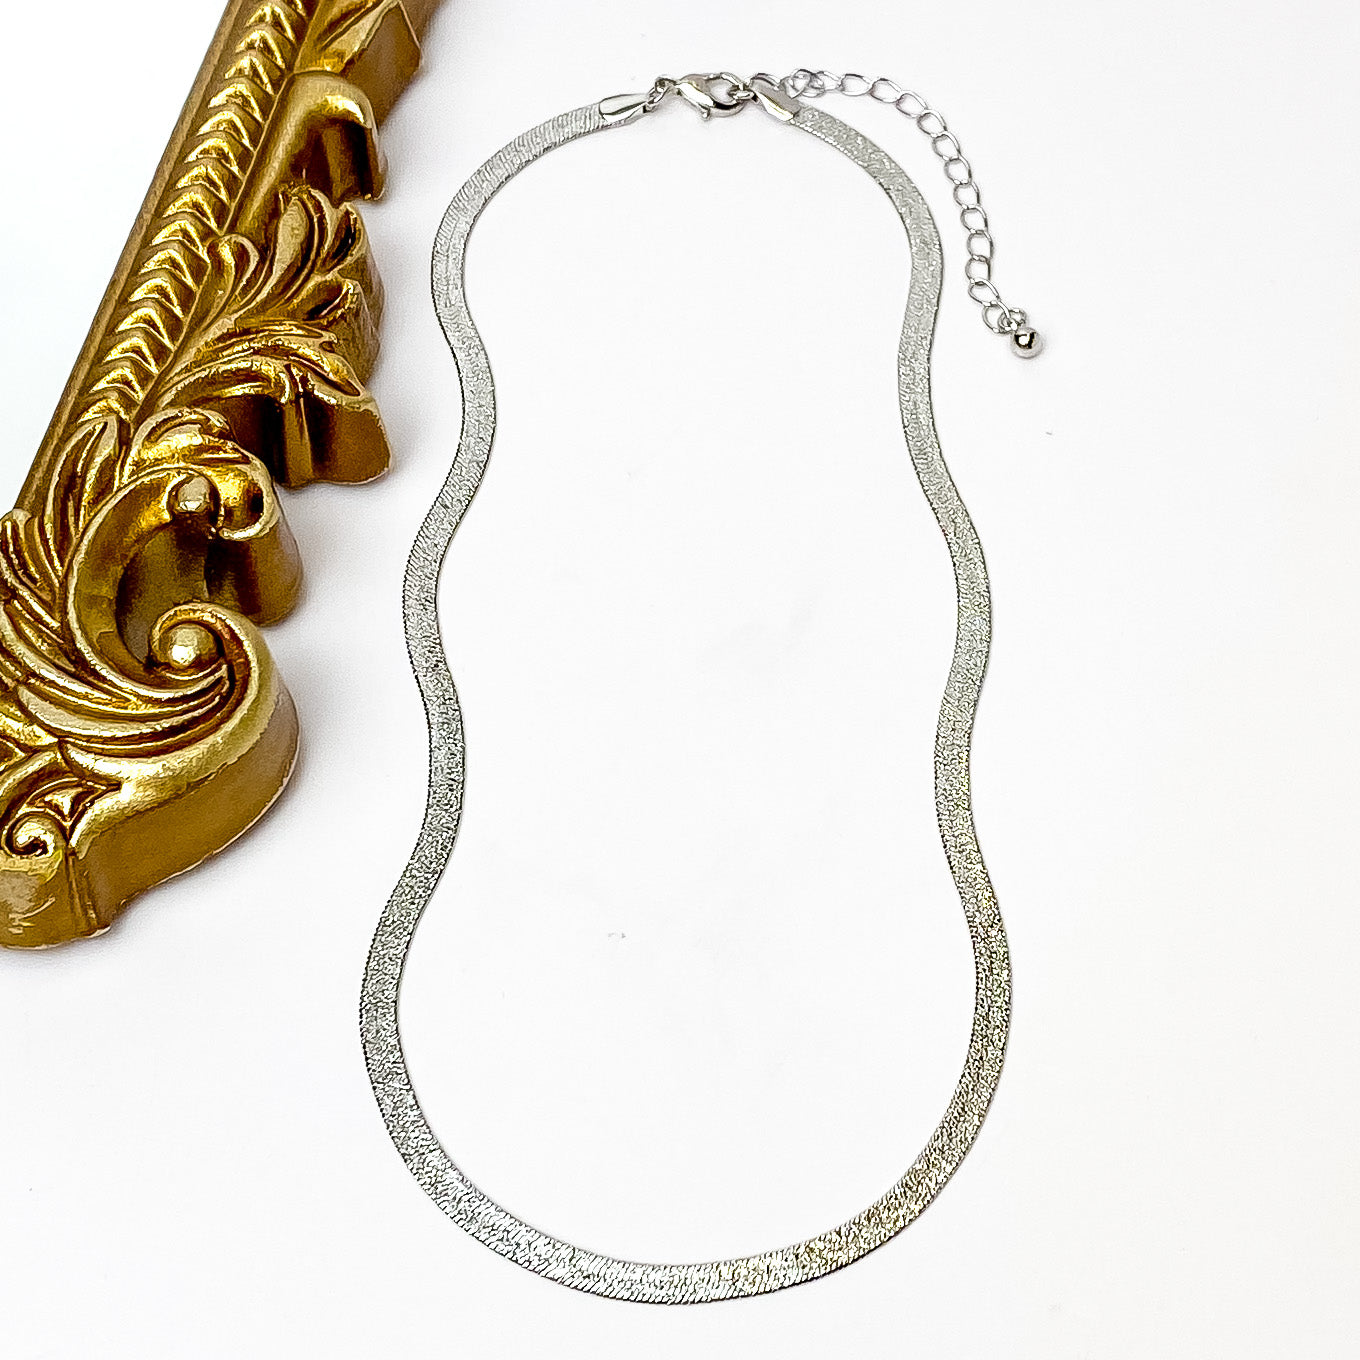 Silver herringbone chain necklace with a silver necklace adjuster. This necklace is pictured on a white background with a gold mirror on the left side. 